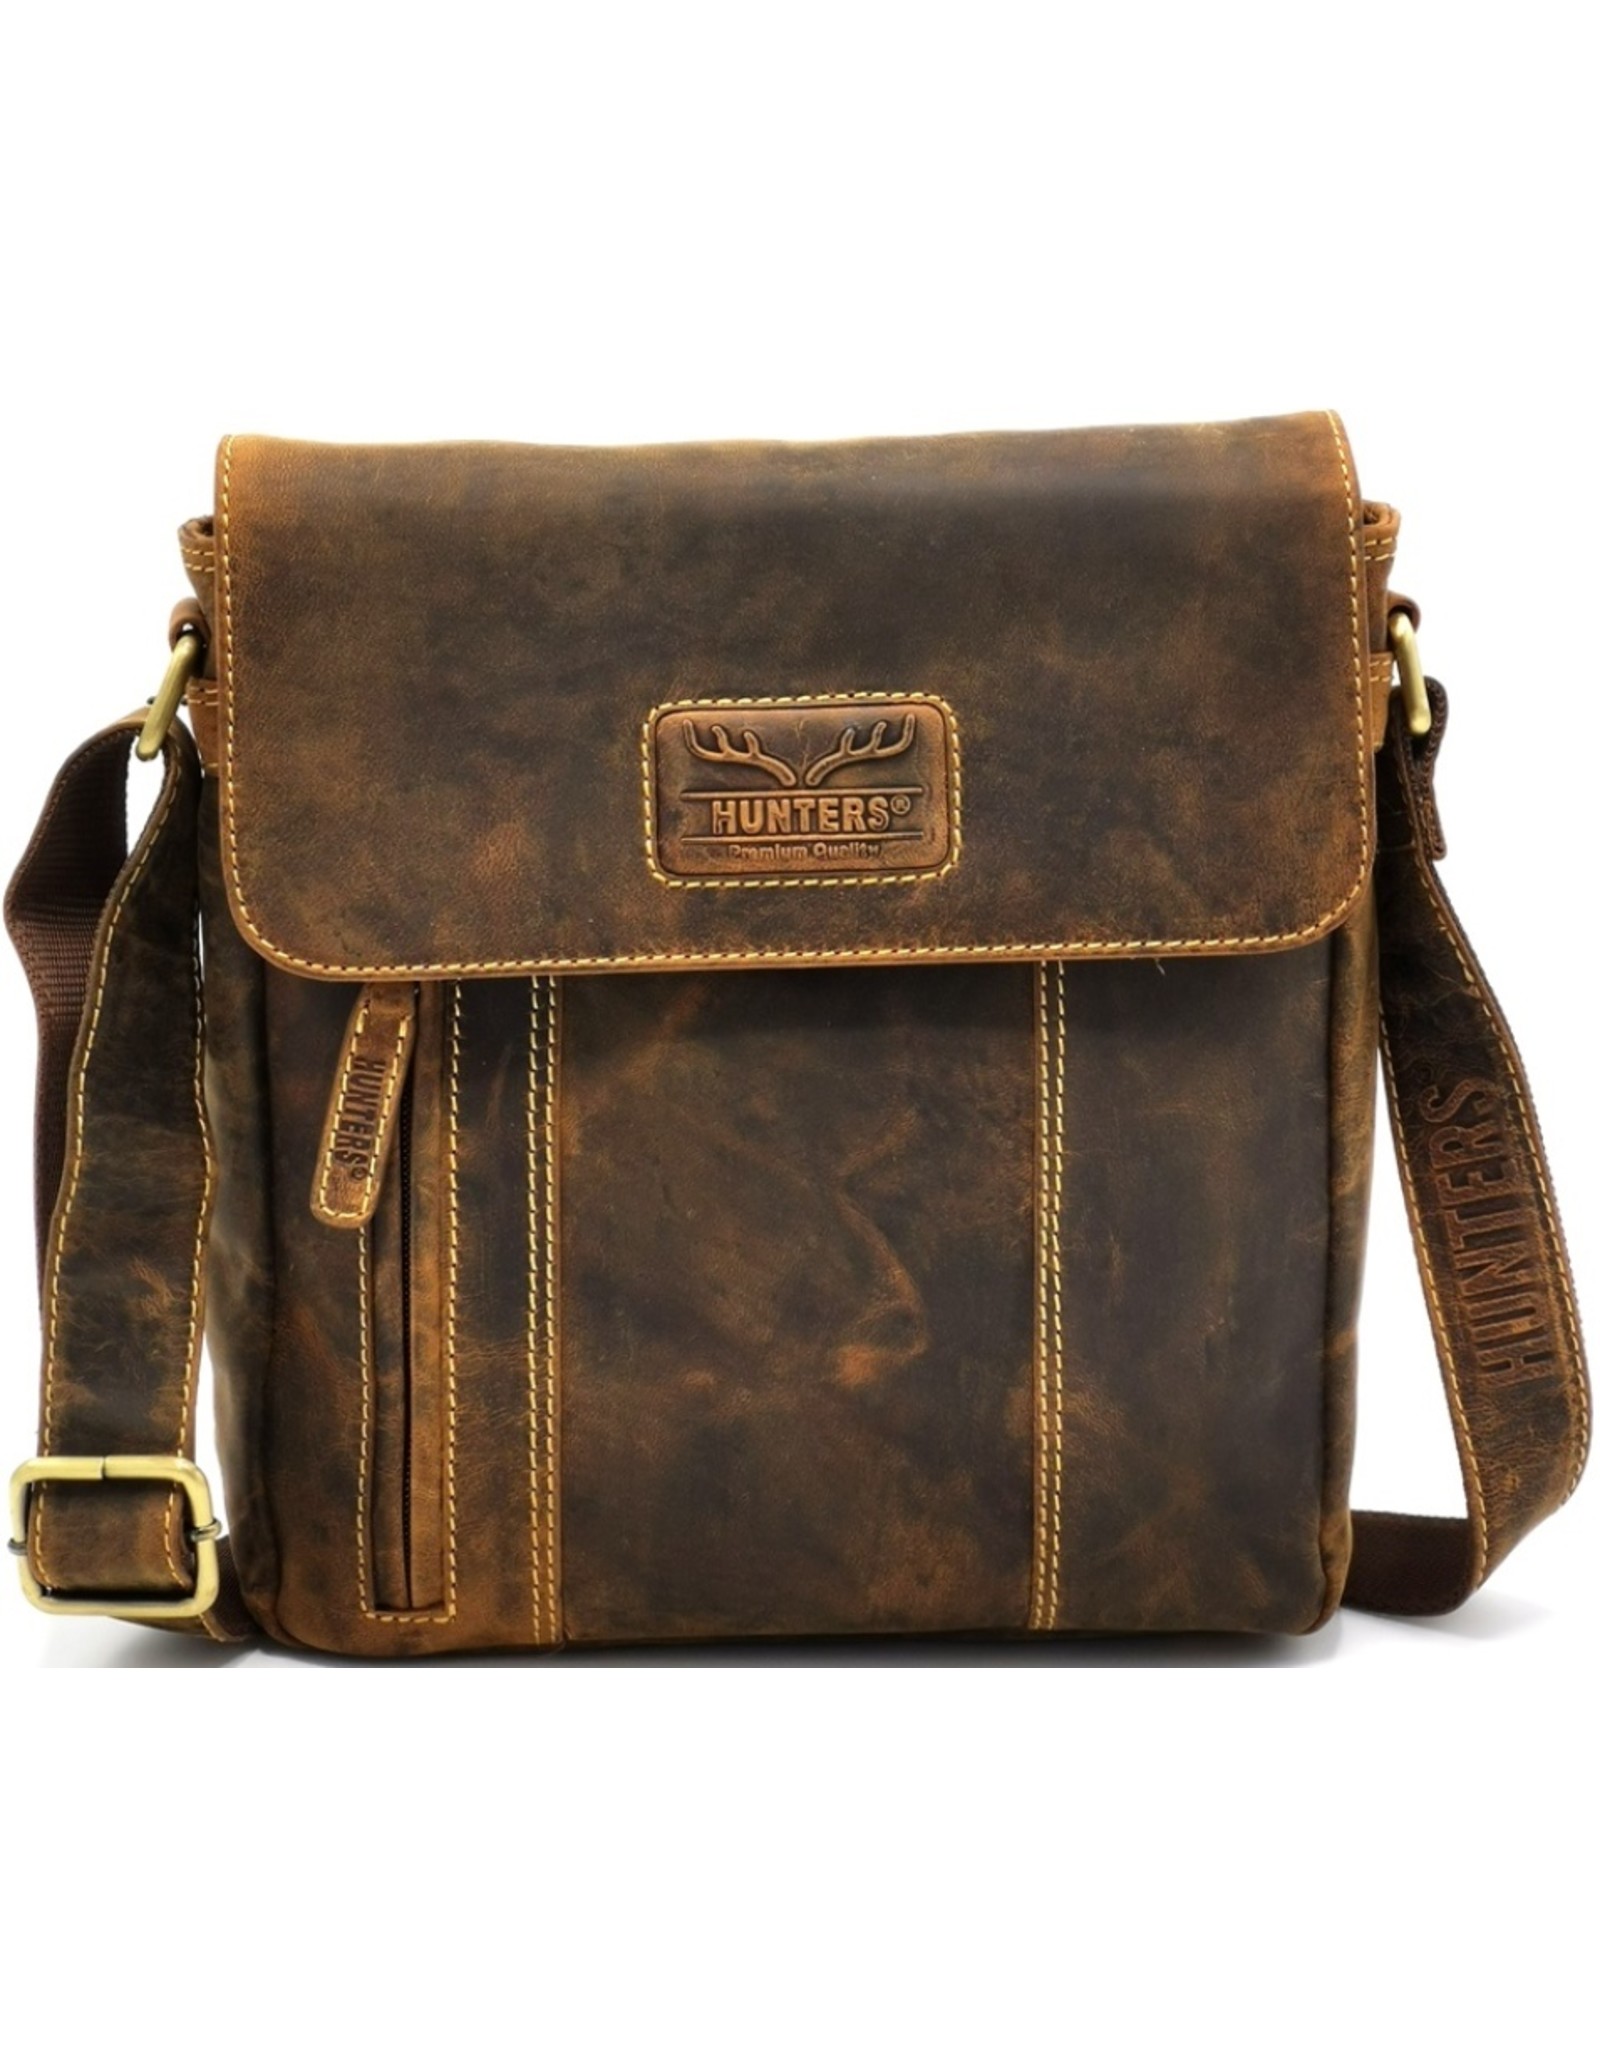 Hunters Leather Shoulder bags  Leather crossbody bags - Hunters crossbody bag with short cover Buffalo Leather